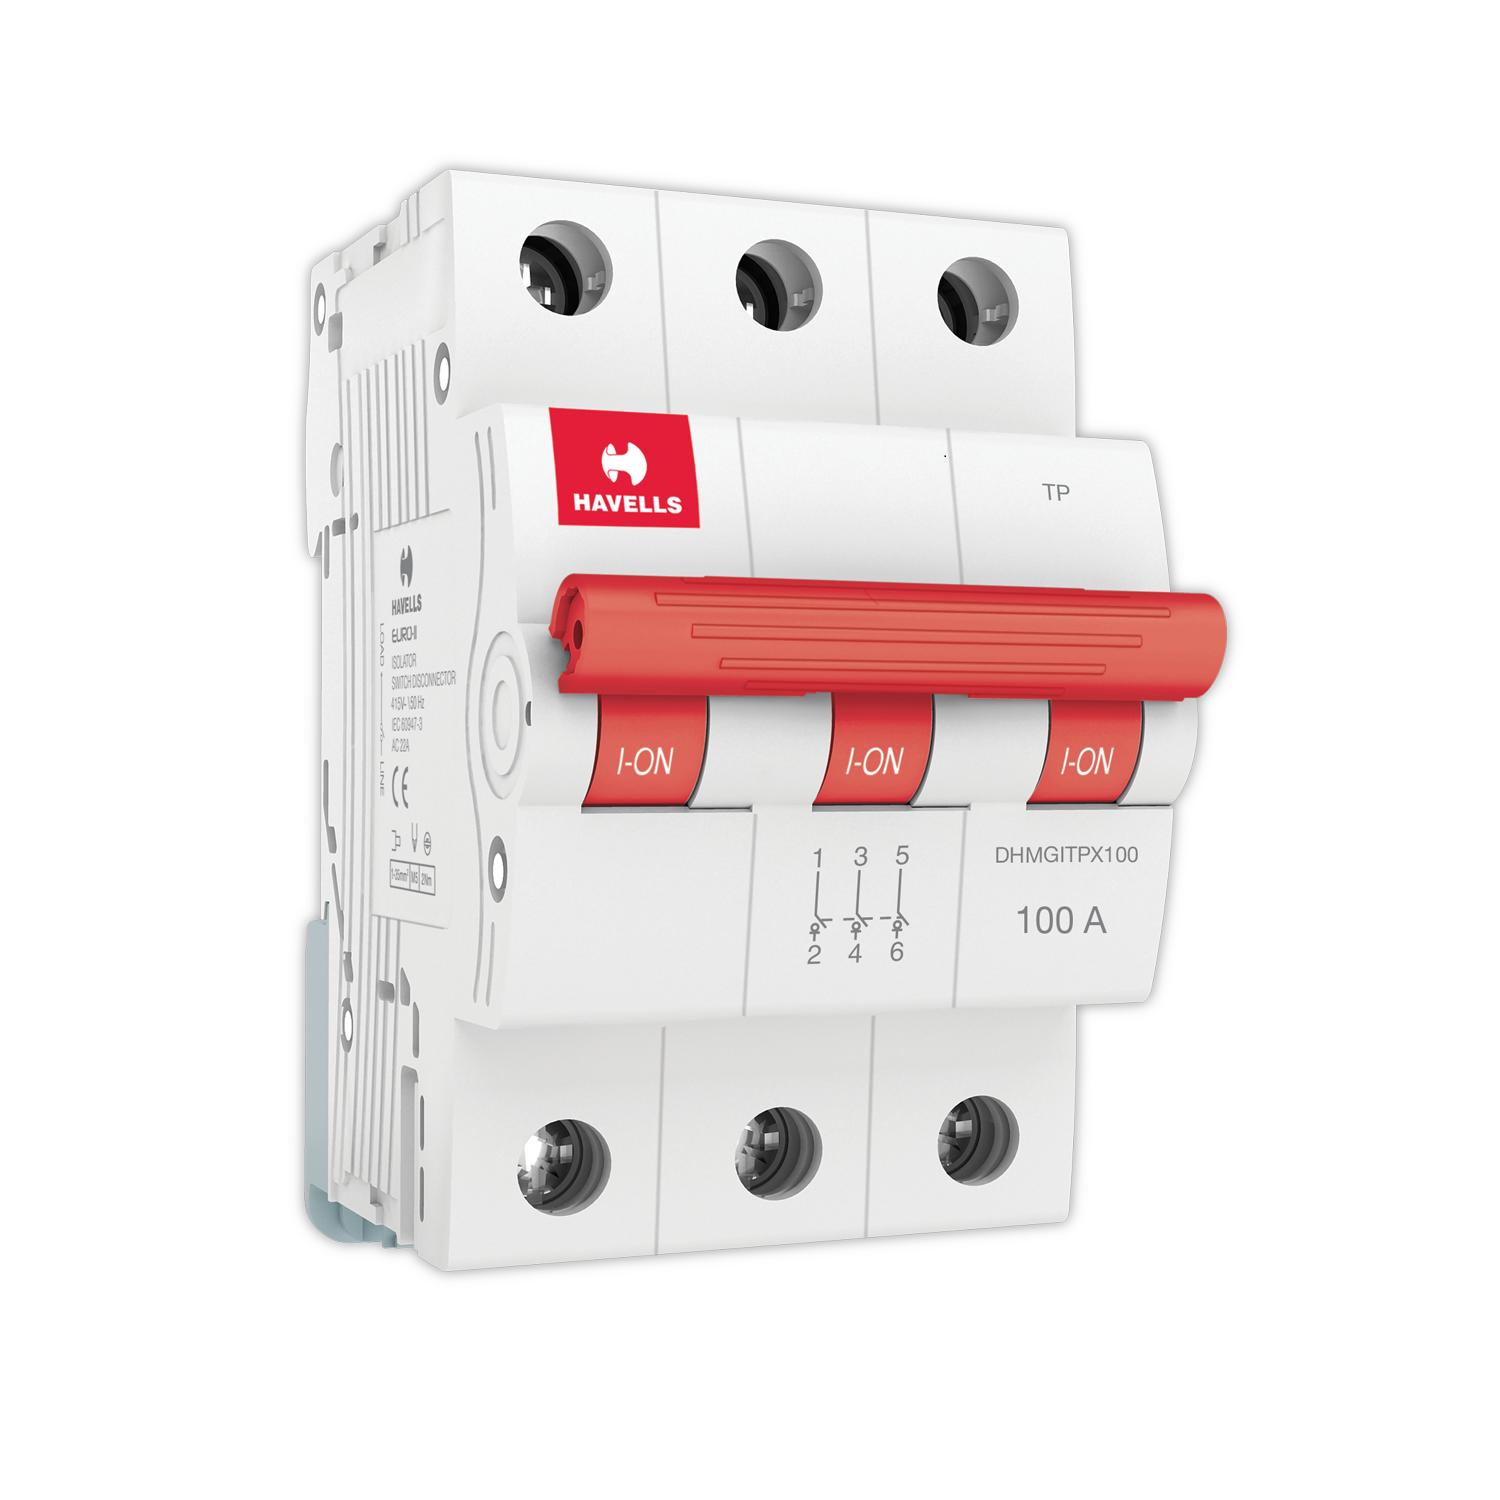 Havells TP Isolator Switching Device (Pack of 2)